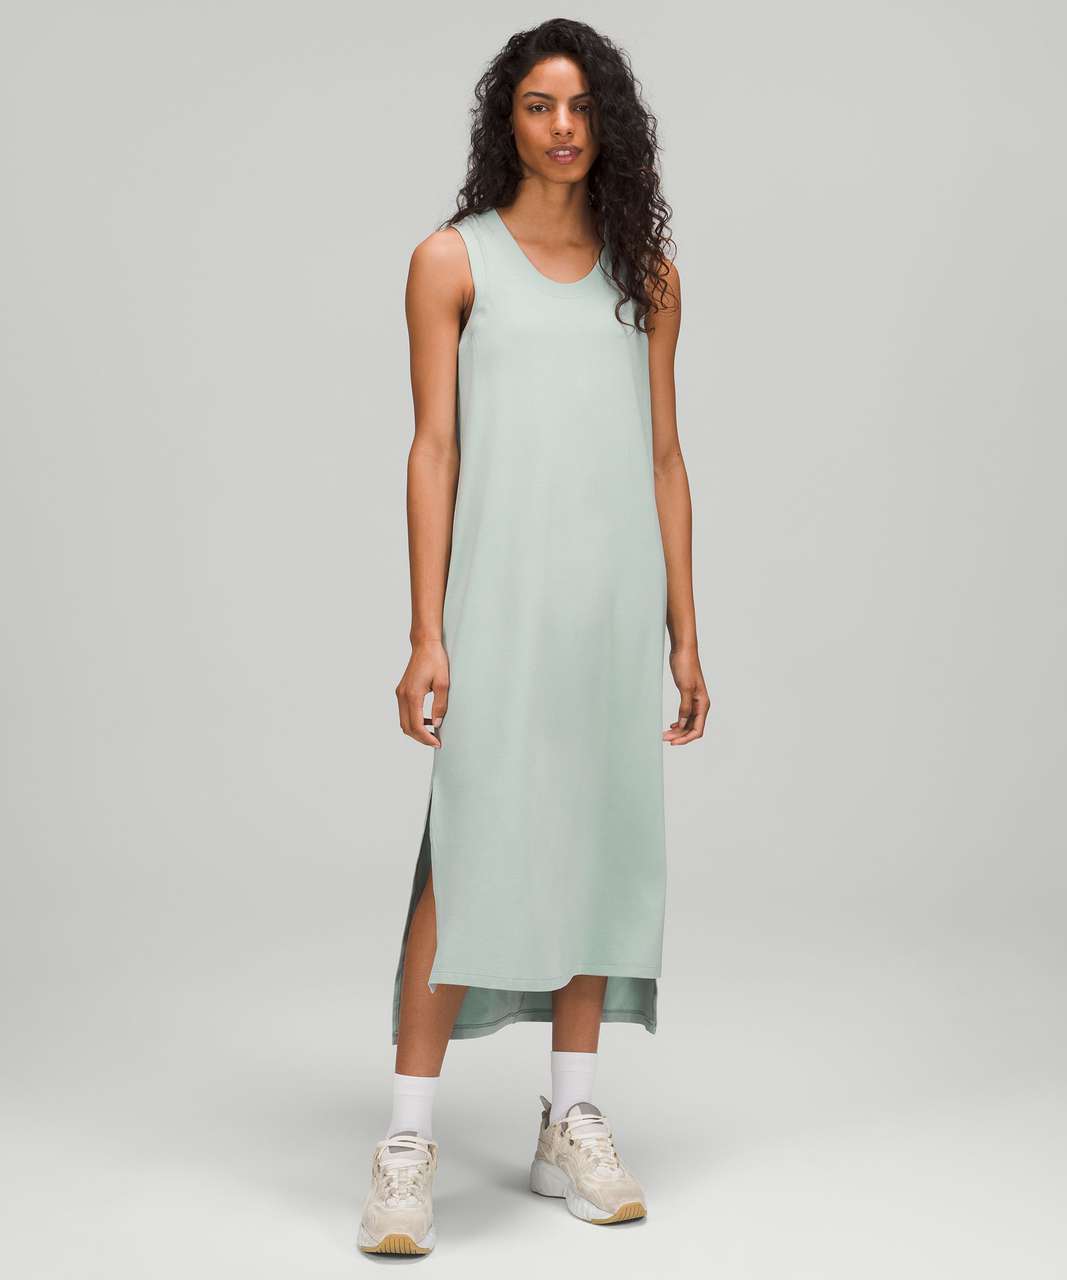 Lululemon All Yours Tank Maxi Dress - Silver Blue